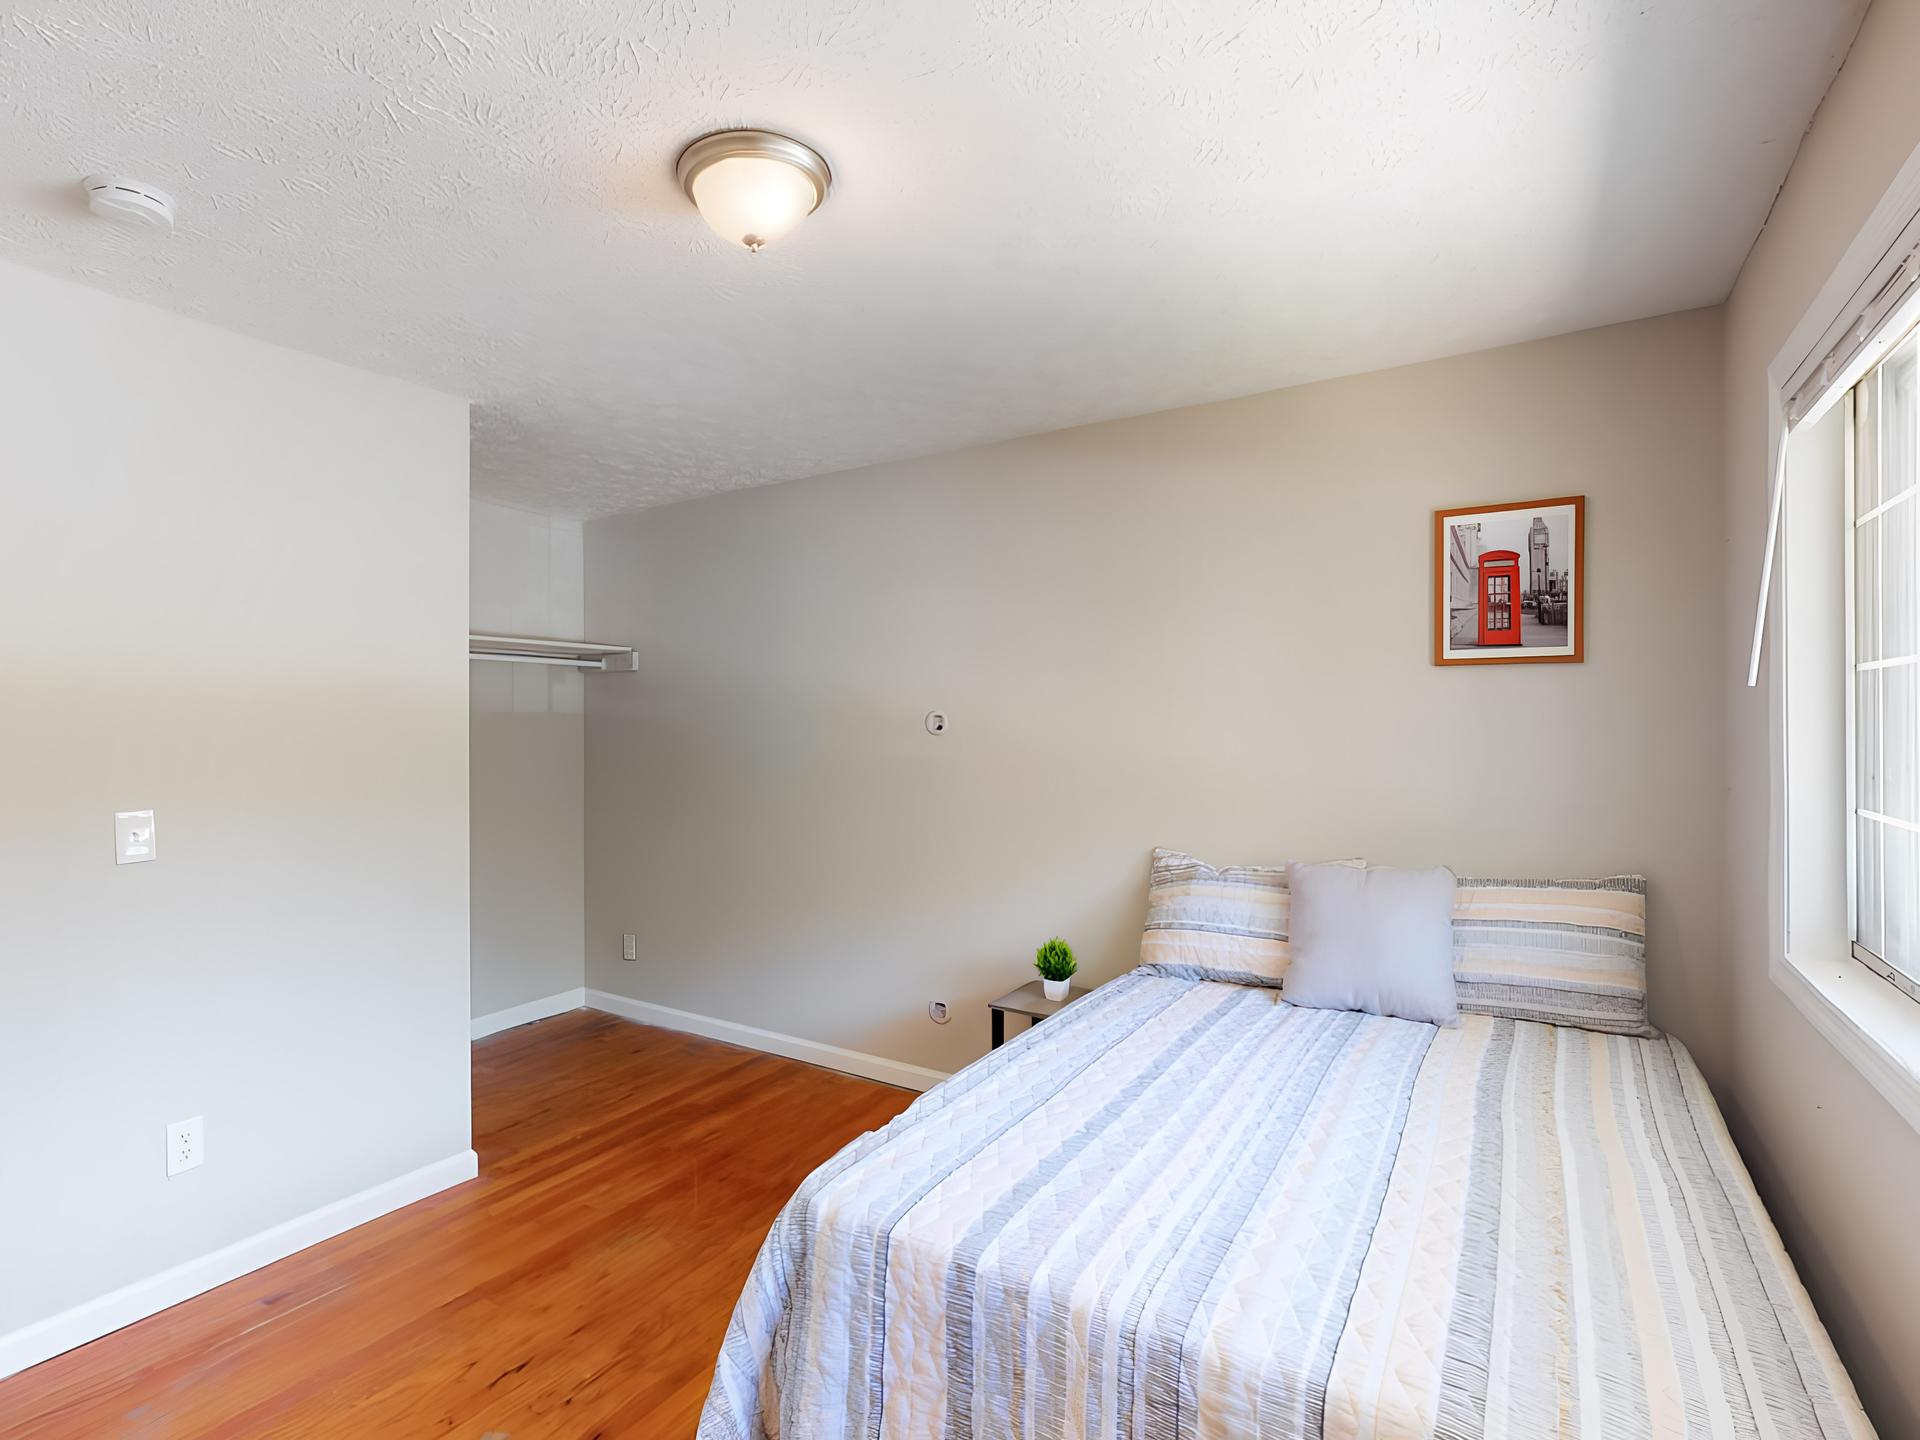 on the top floor, full-bed, with wide street view window. Across from the kitchen. Room size of 11'6"x10'5"